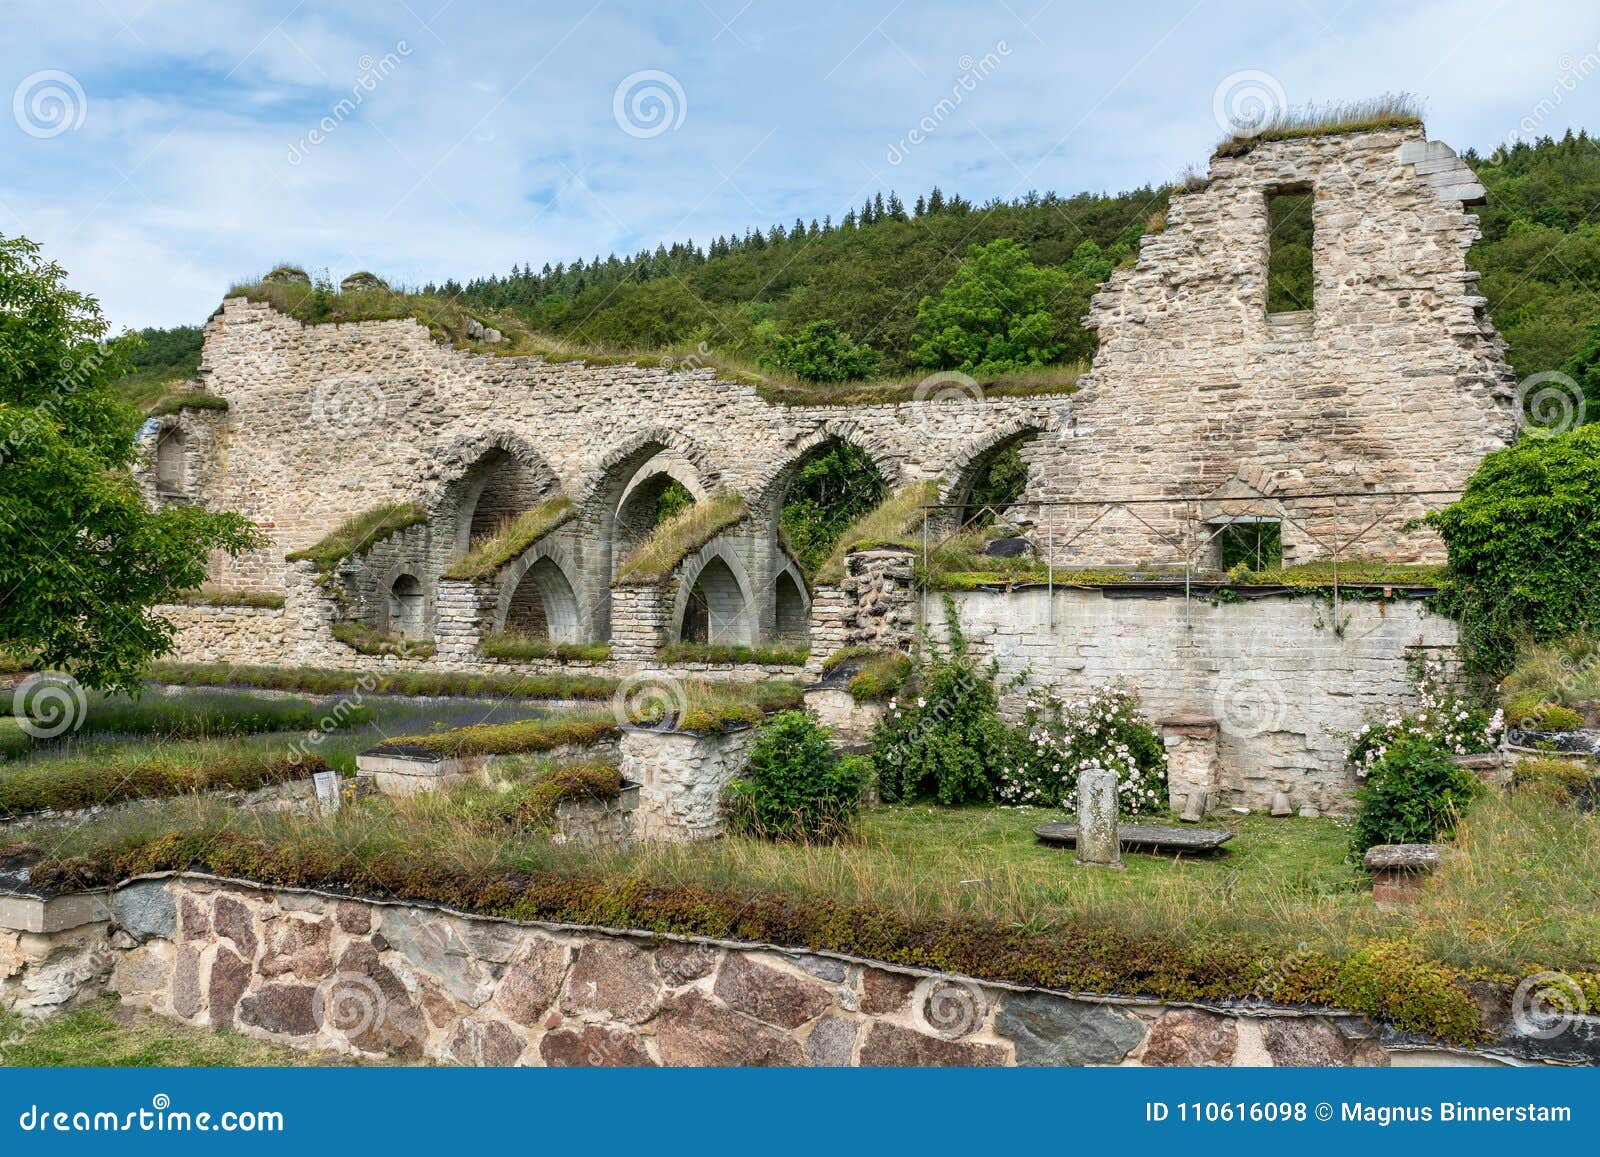 Ruin of Monastery from the Middle Ages with Nice Garden in the F Stock